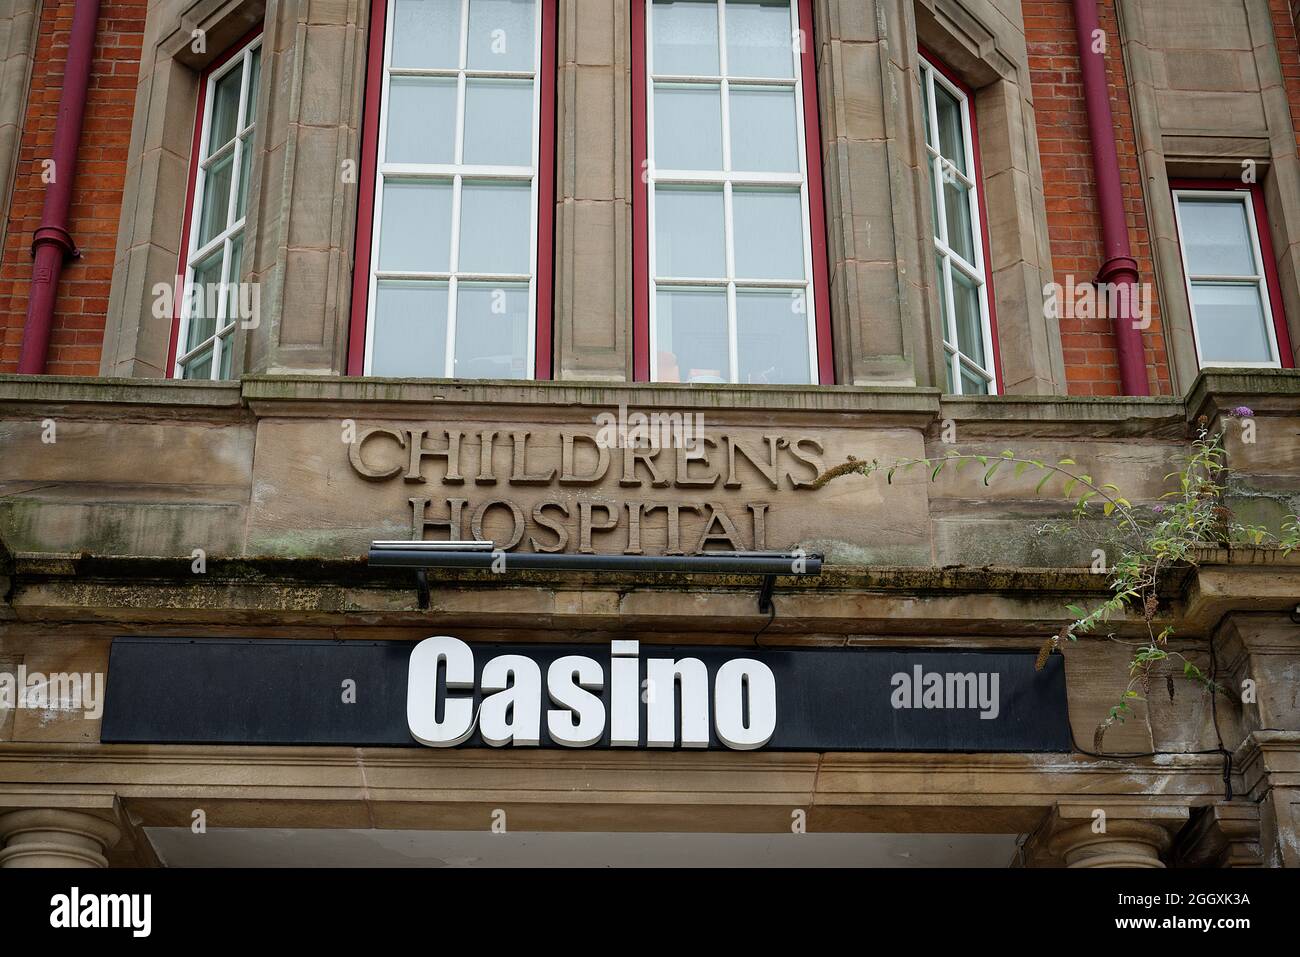 An amusing or sad juxtaposition of the old Children's Hospital sign and the new Casino sign. Health to wealth! Hospital to gambling den. Stock Photo